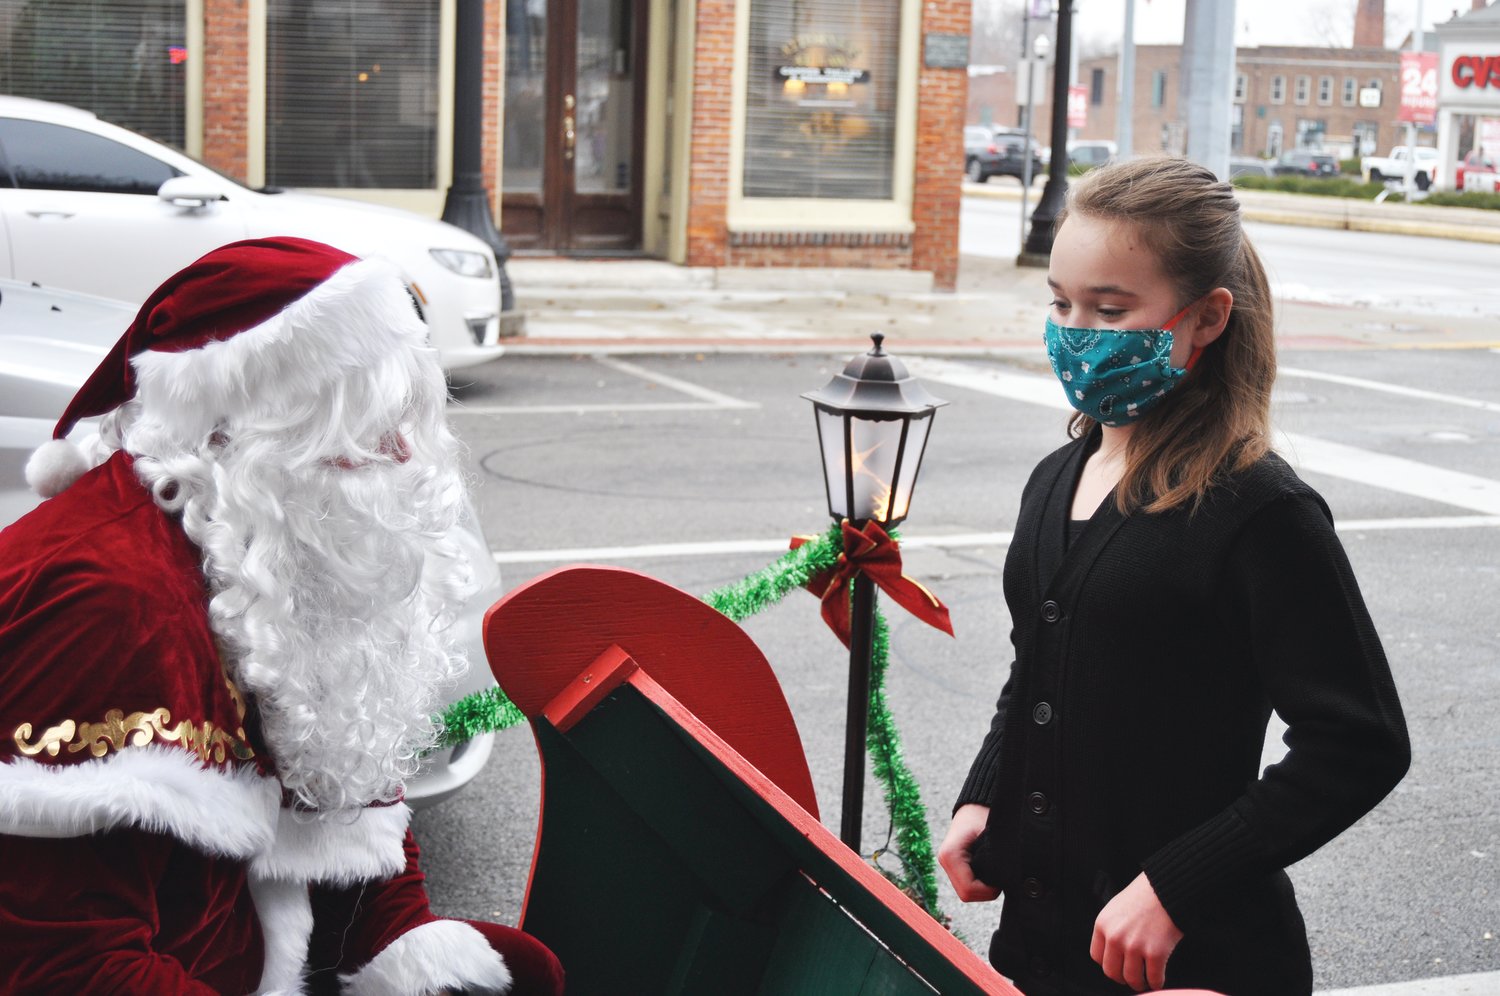 Acelyn Starcevich, 10, gives her wish list to Santa at Brothers Pizza Company on Saturday. St. Nick came to the restaurant with his elves and a reindeer to visit children, who could walk up to his sleigh or deliver their lists from the car. Children received a toy and a CD featuring music from local artists.